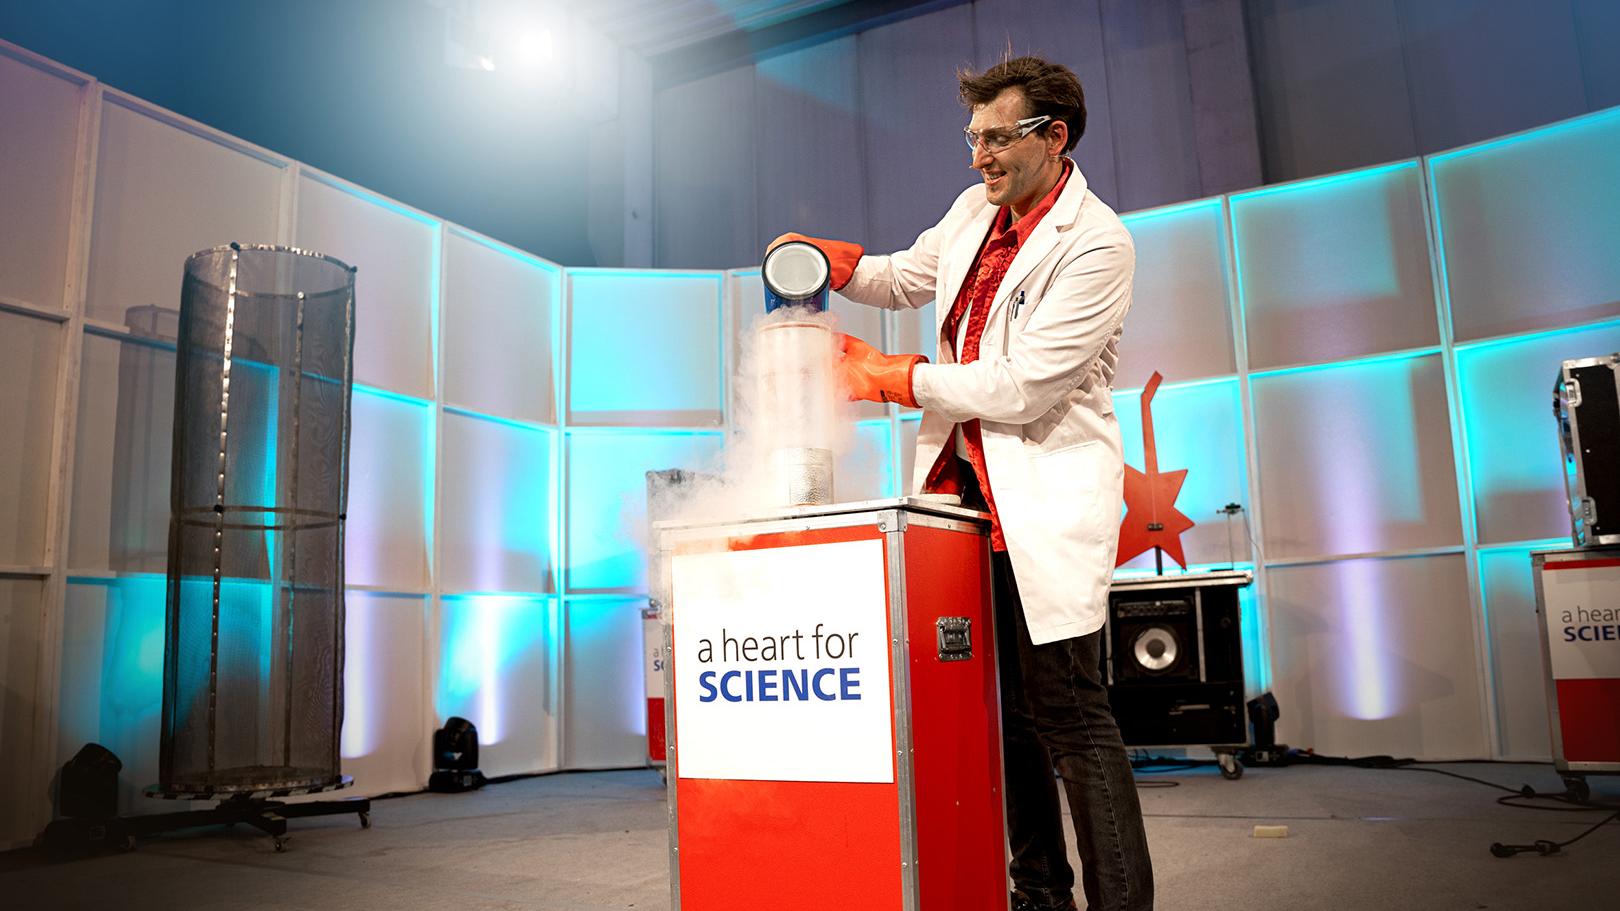 Professor’s highlights – science show